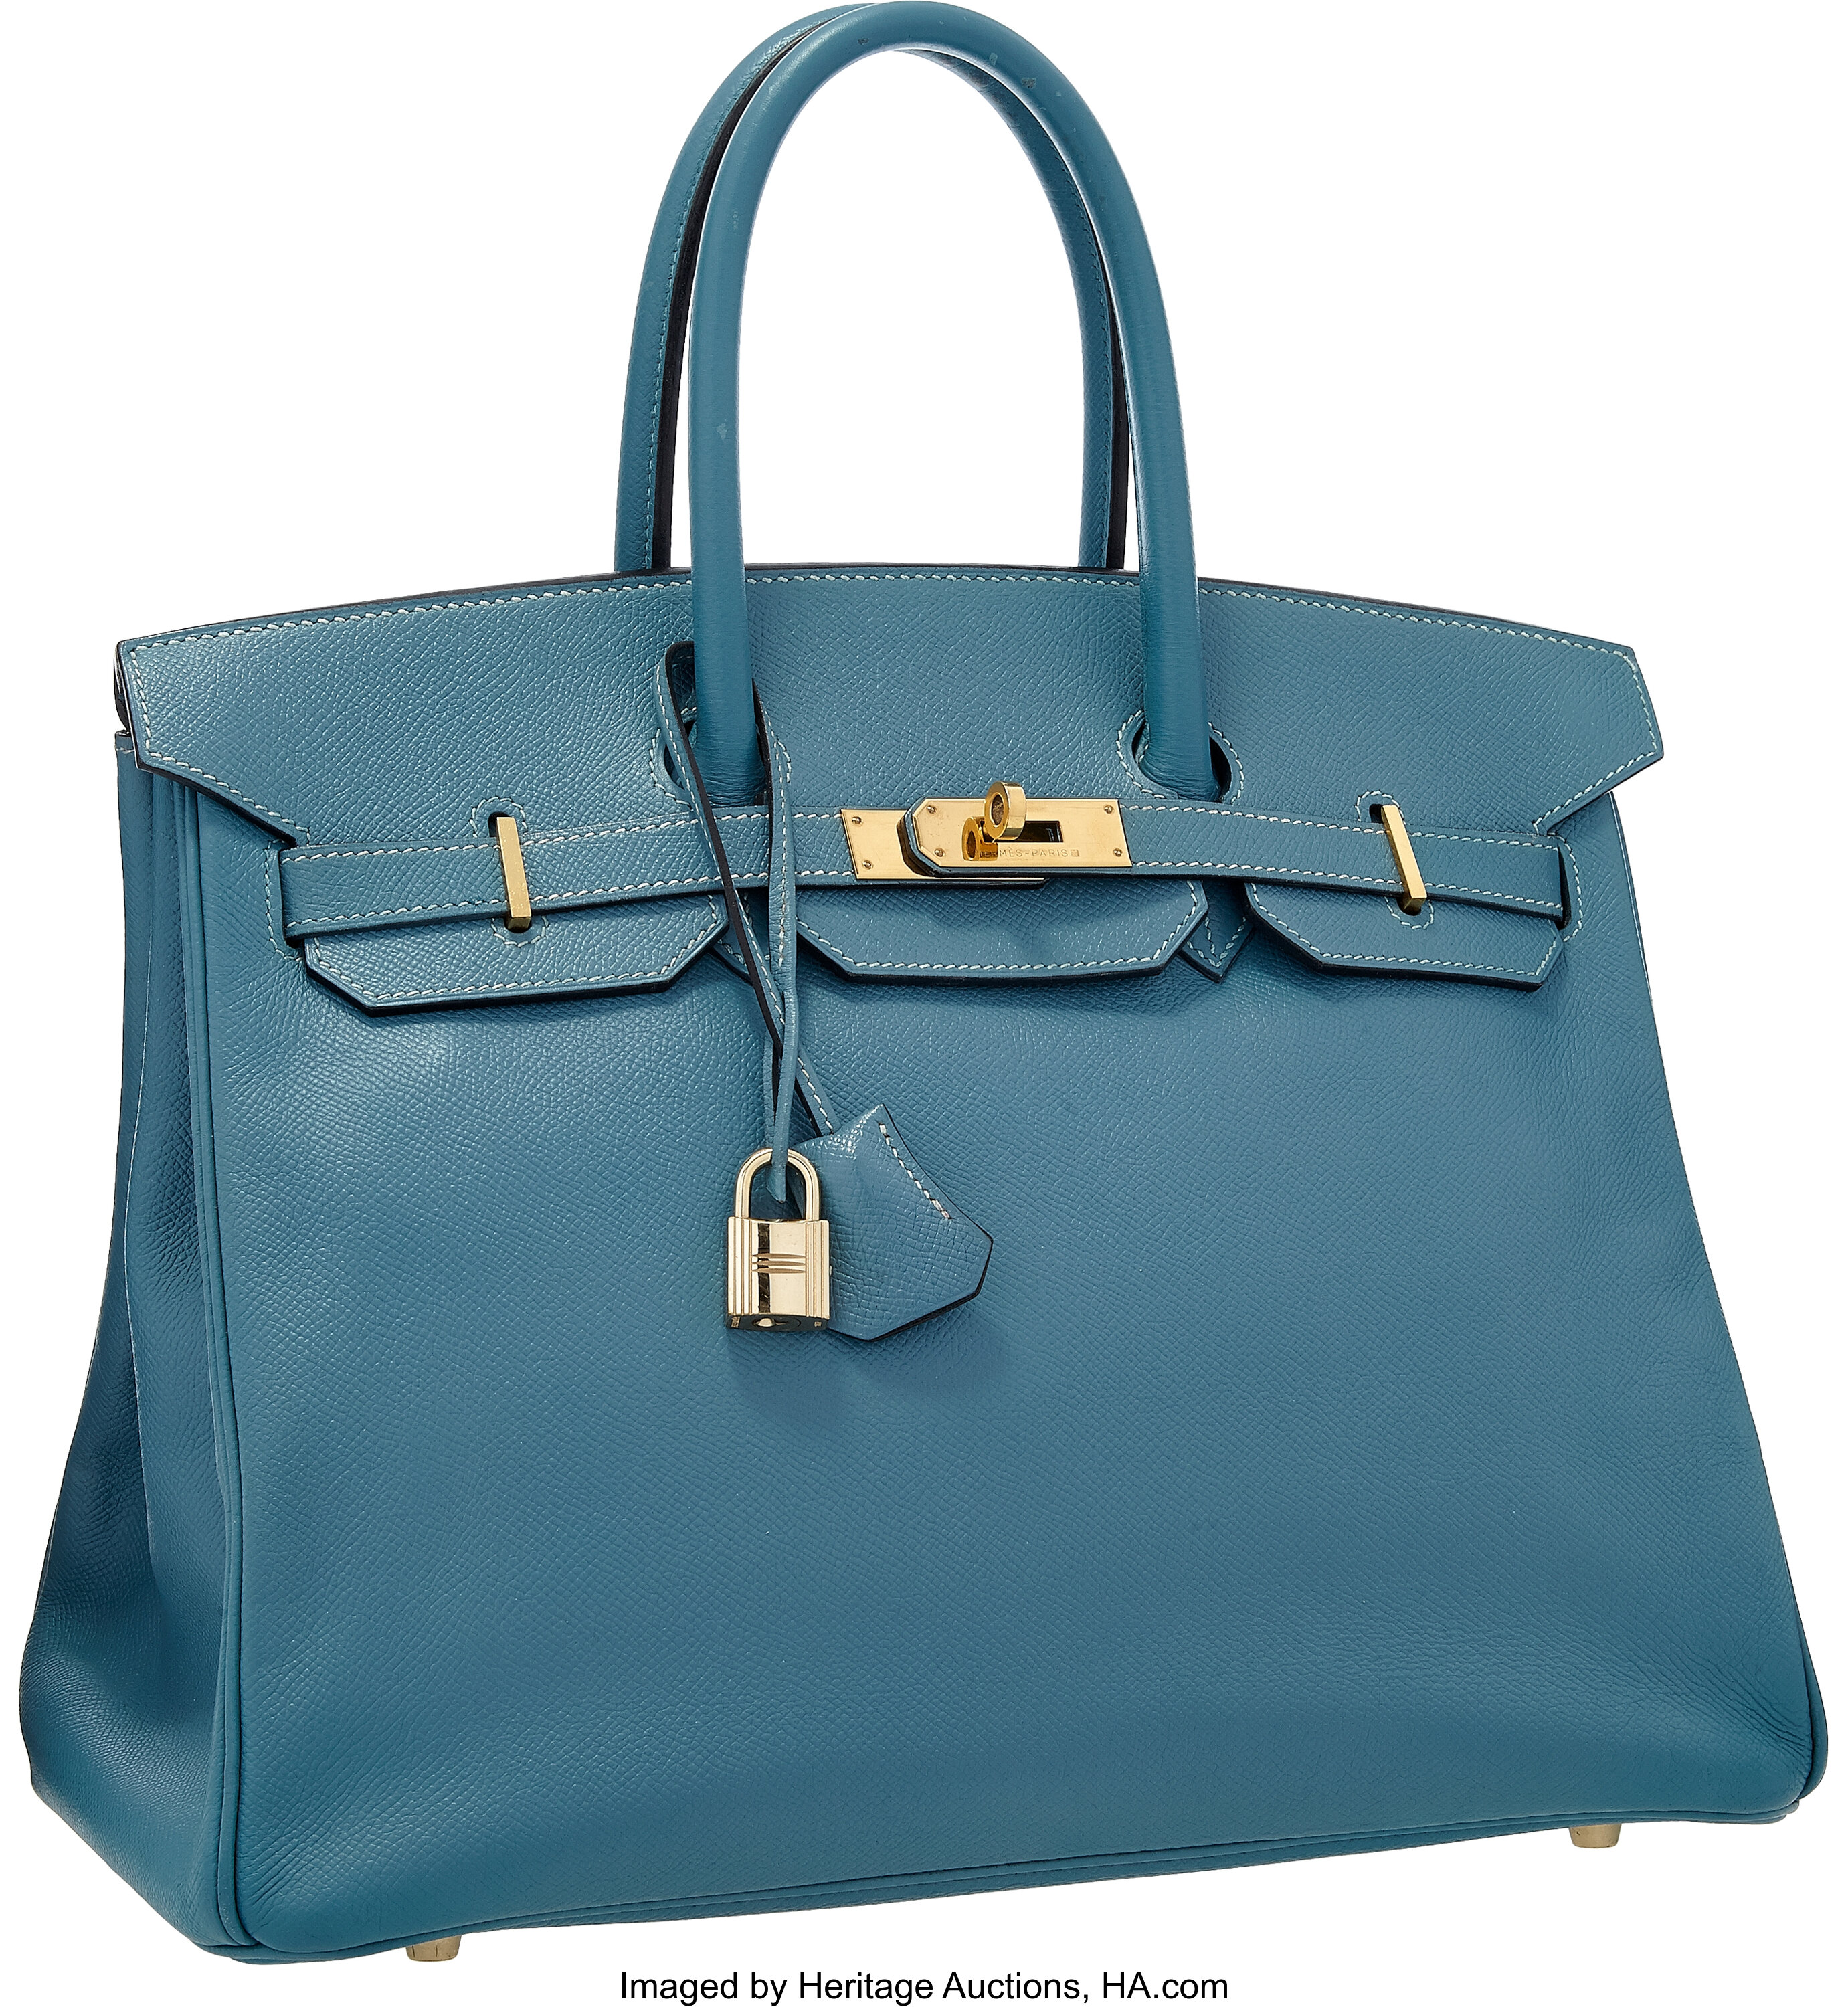 Hermes 35cm Blue Jean Courchevel Leather Birkin Bag with Gold